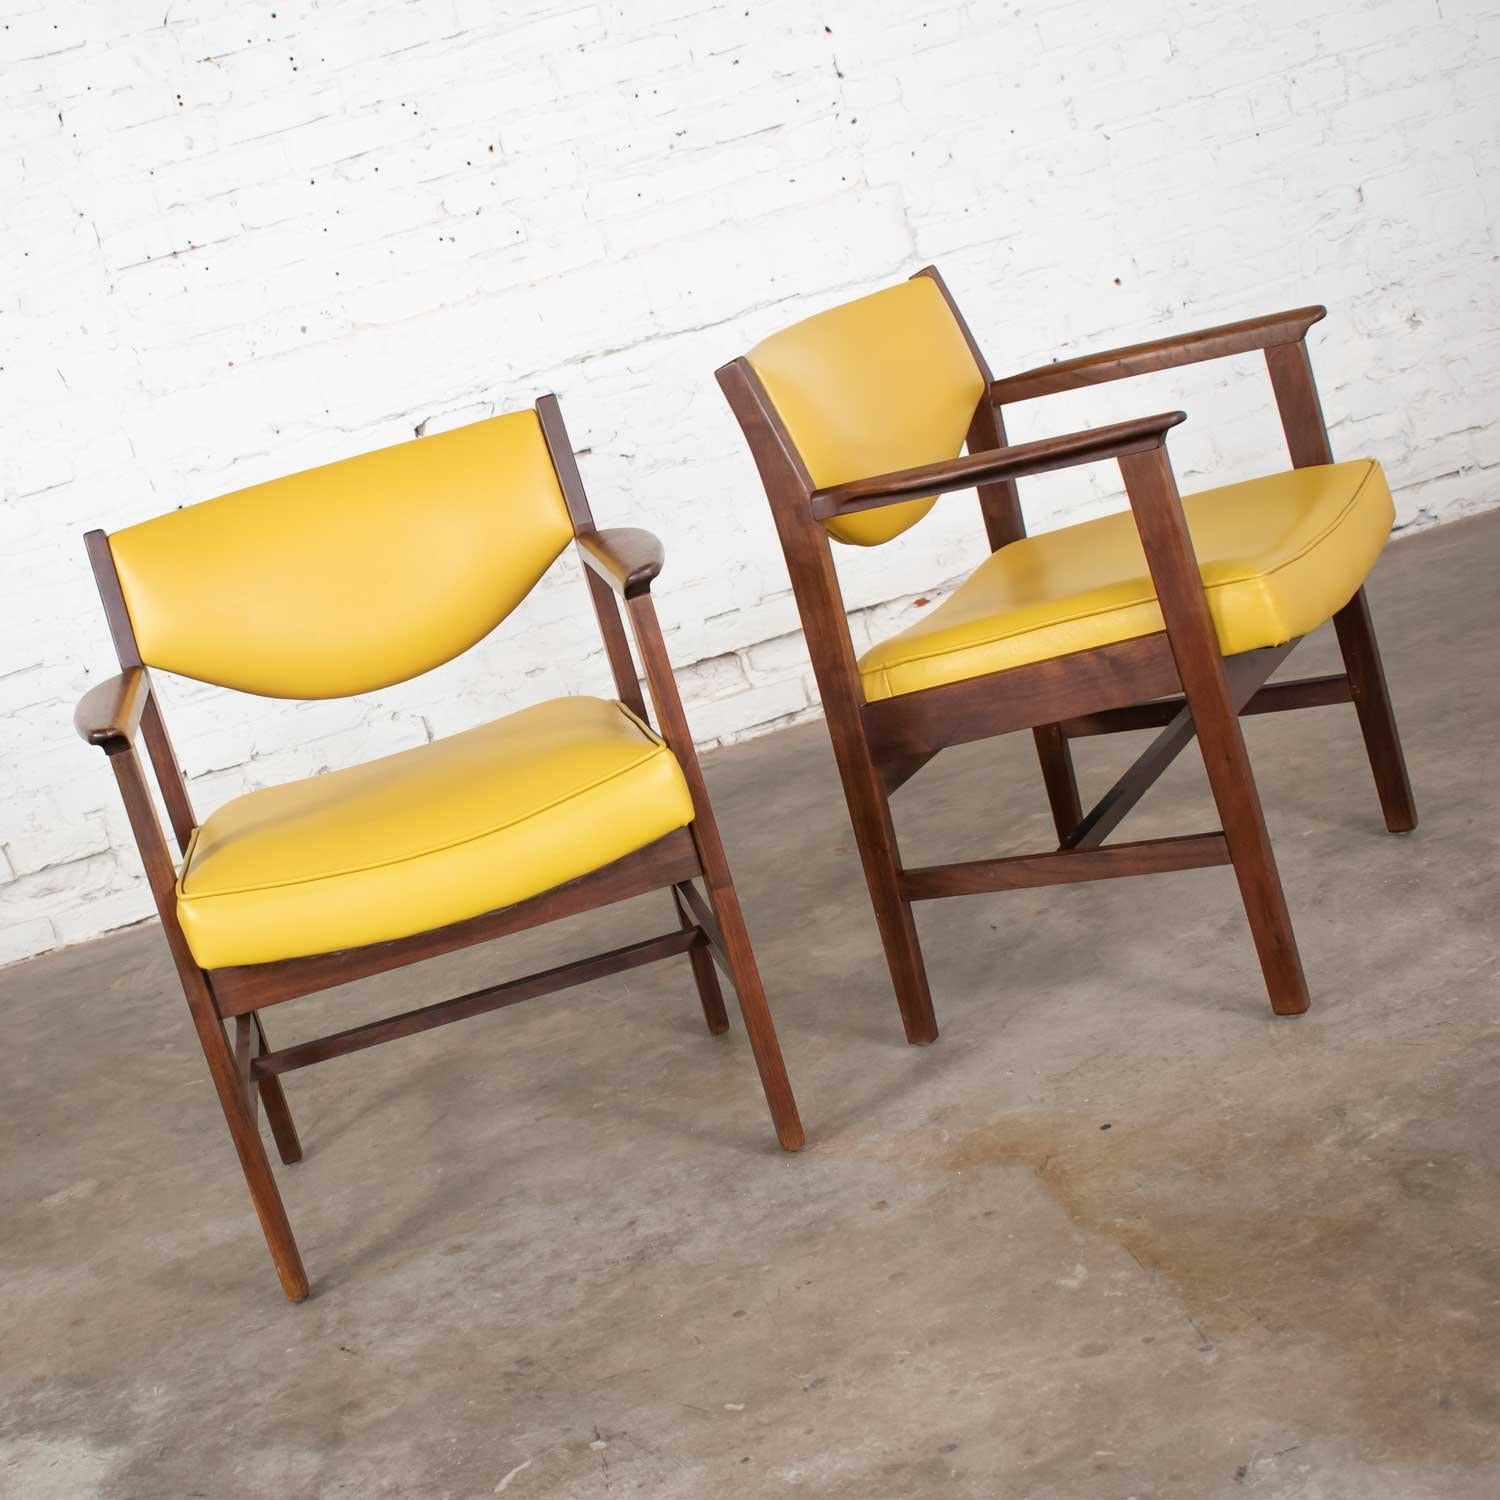 Fabolous pair of armchairs by Madison Furniture Ind upholstered in gold/yellow vinyl faux leather with walnut frame. Wonderful vintage condition. Age consistent wear with no outstanding flaws. Please see photos, circa 1960s.

Talk about comfort